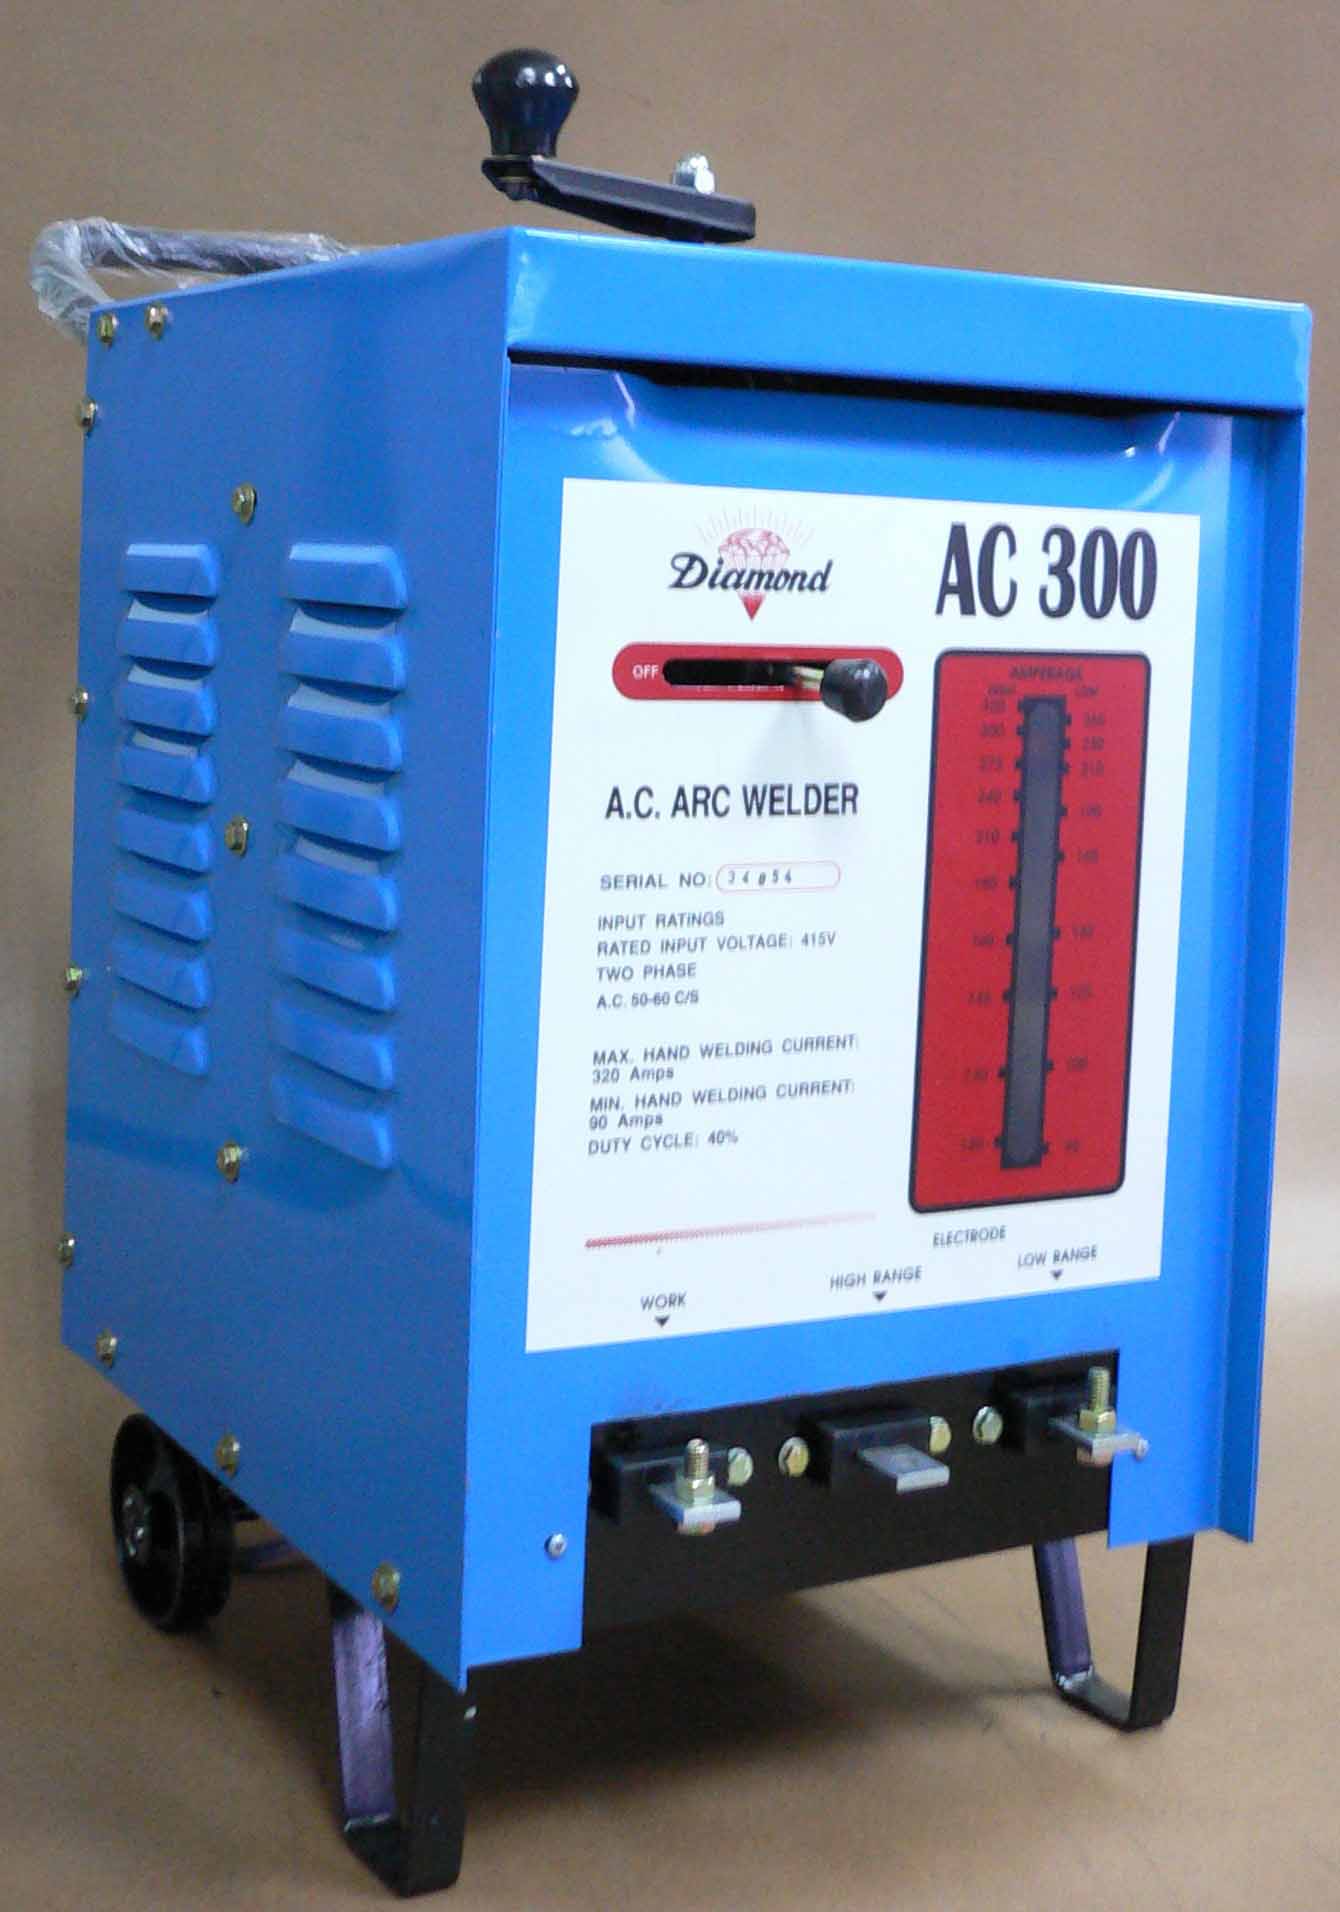 The AC 300 is the modern moveable core current control welding machine. It is heavy duty core impregnated with high temperature varnish to protect against moisture, dust and thermal overload. Fan assisted cooling for greater reliability in heavy applications. It has the welding current ranges from 90A ~ 320A.